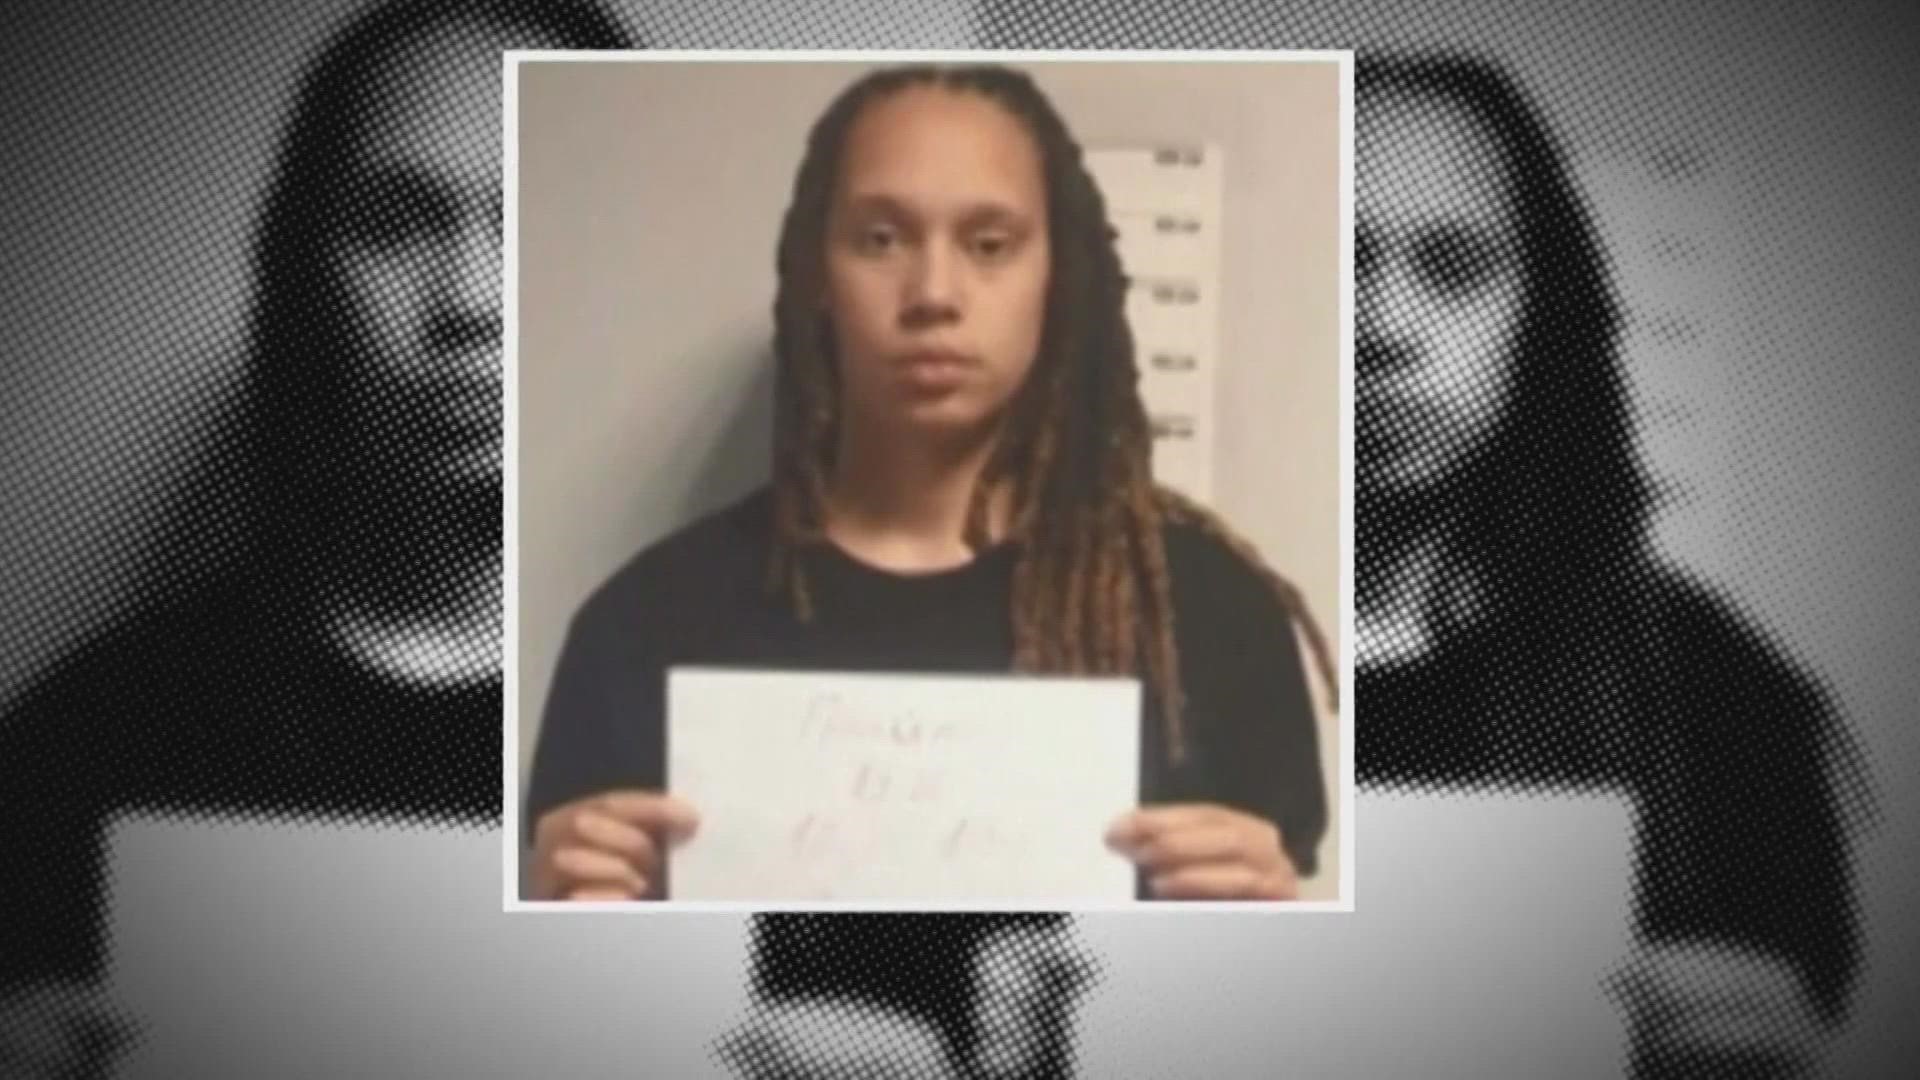 In February, Houston native Brittney Griner was arrested at a Moscow airport. Russian officials said they found cannabis vape cartridges in her luggage.